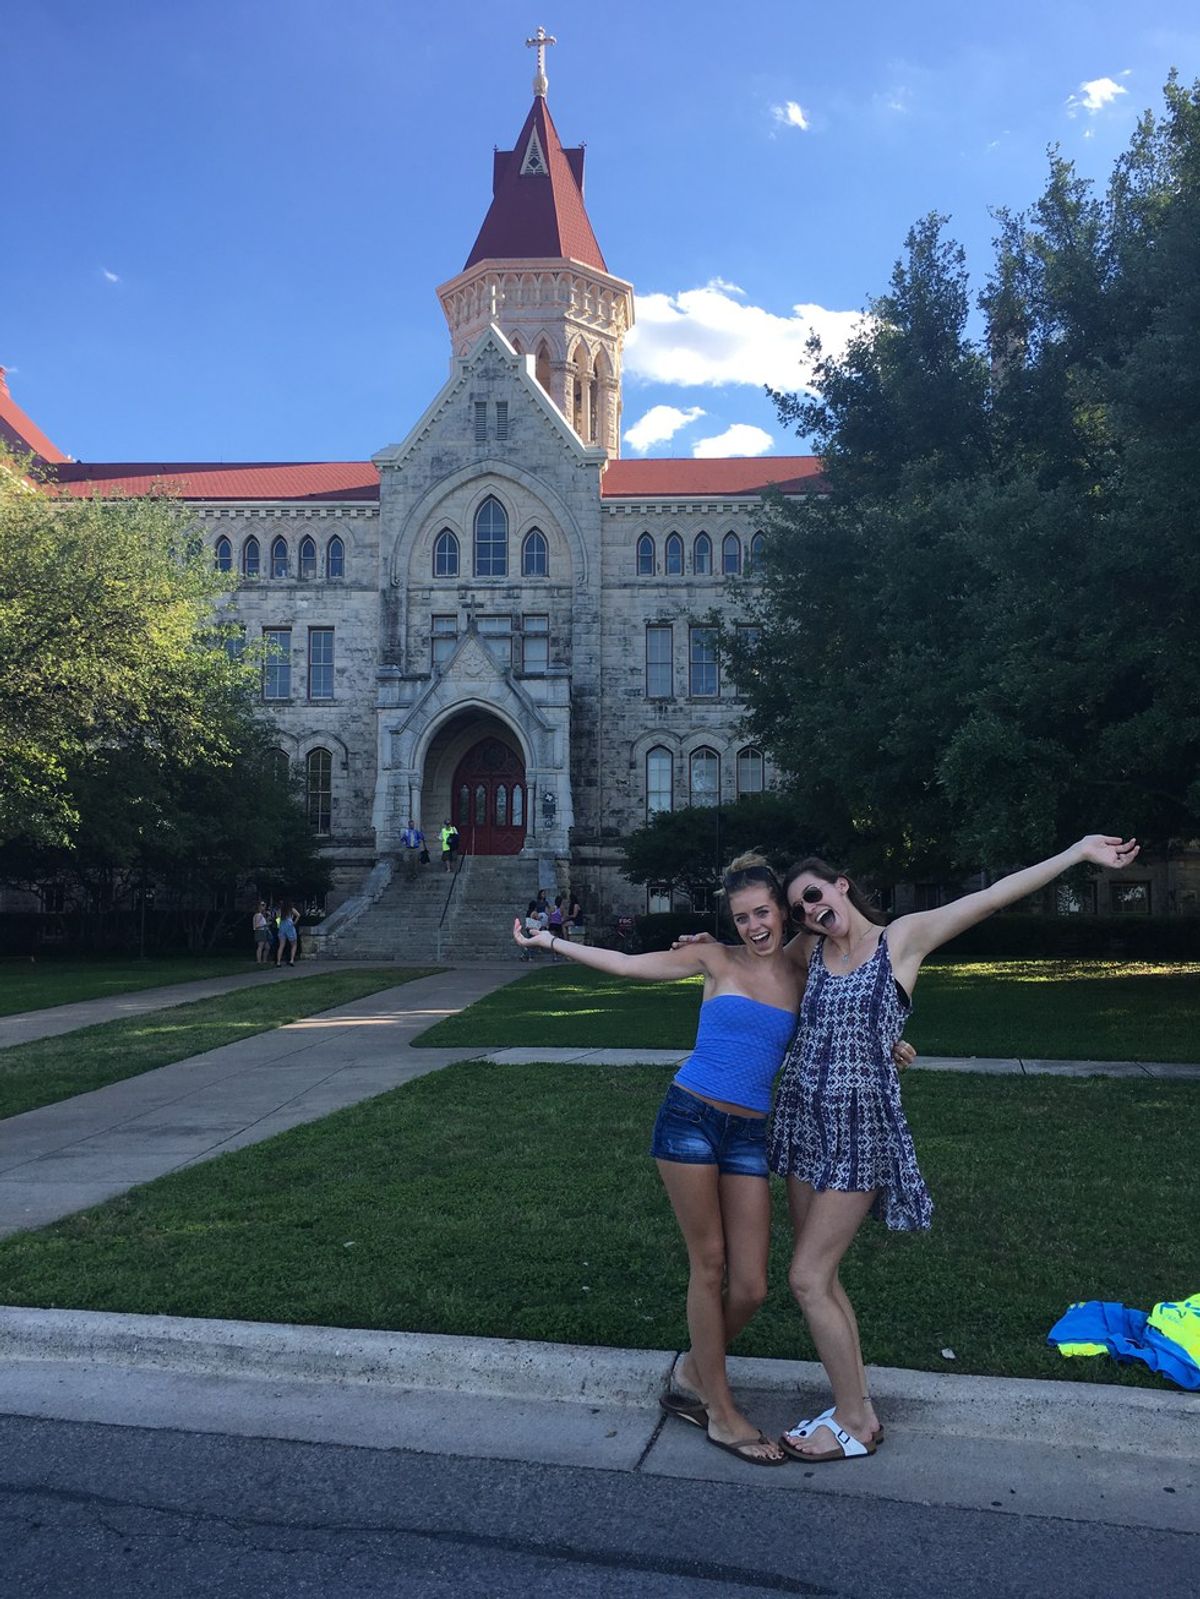 15 Reasons College Is The Absolute Worst